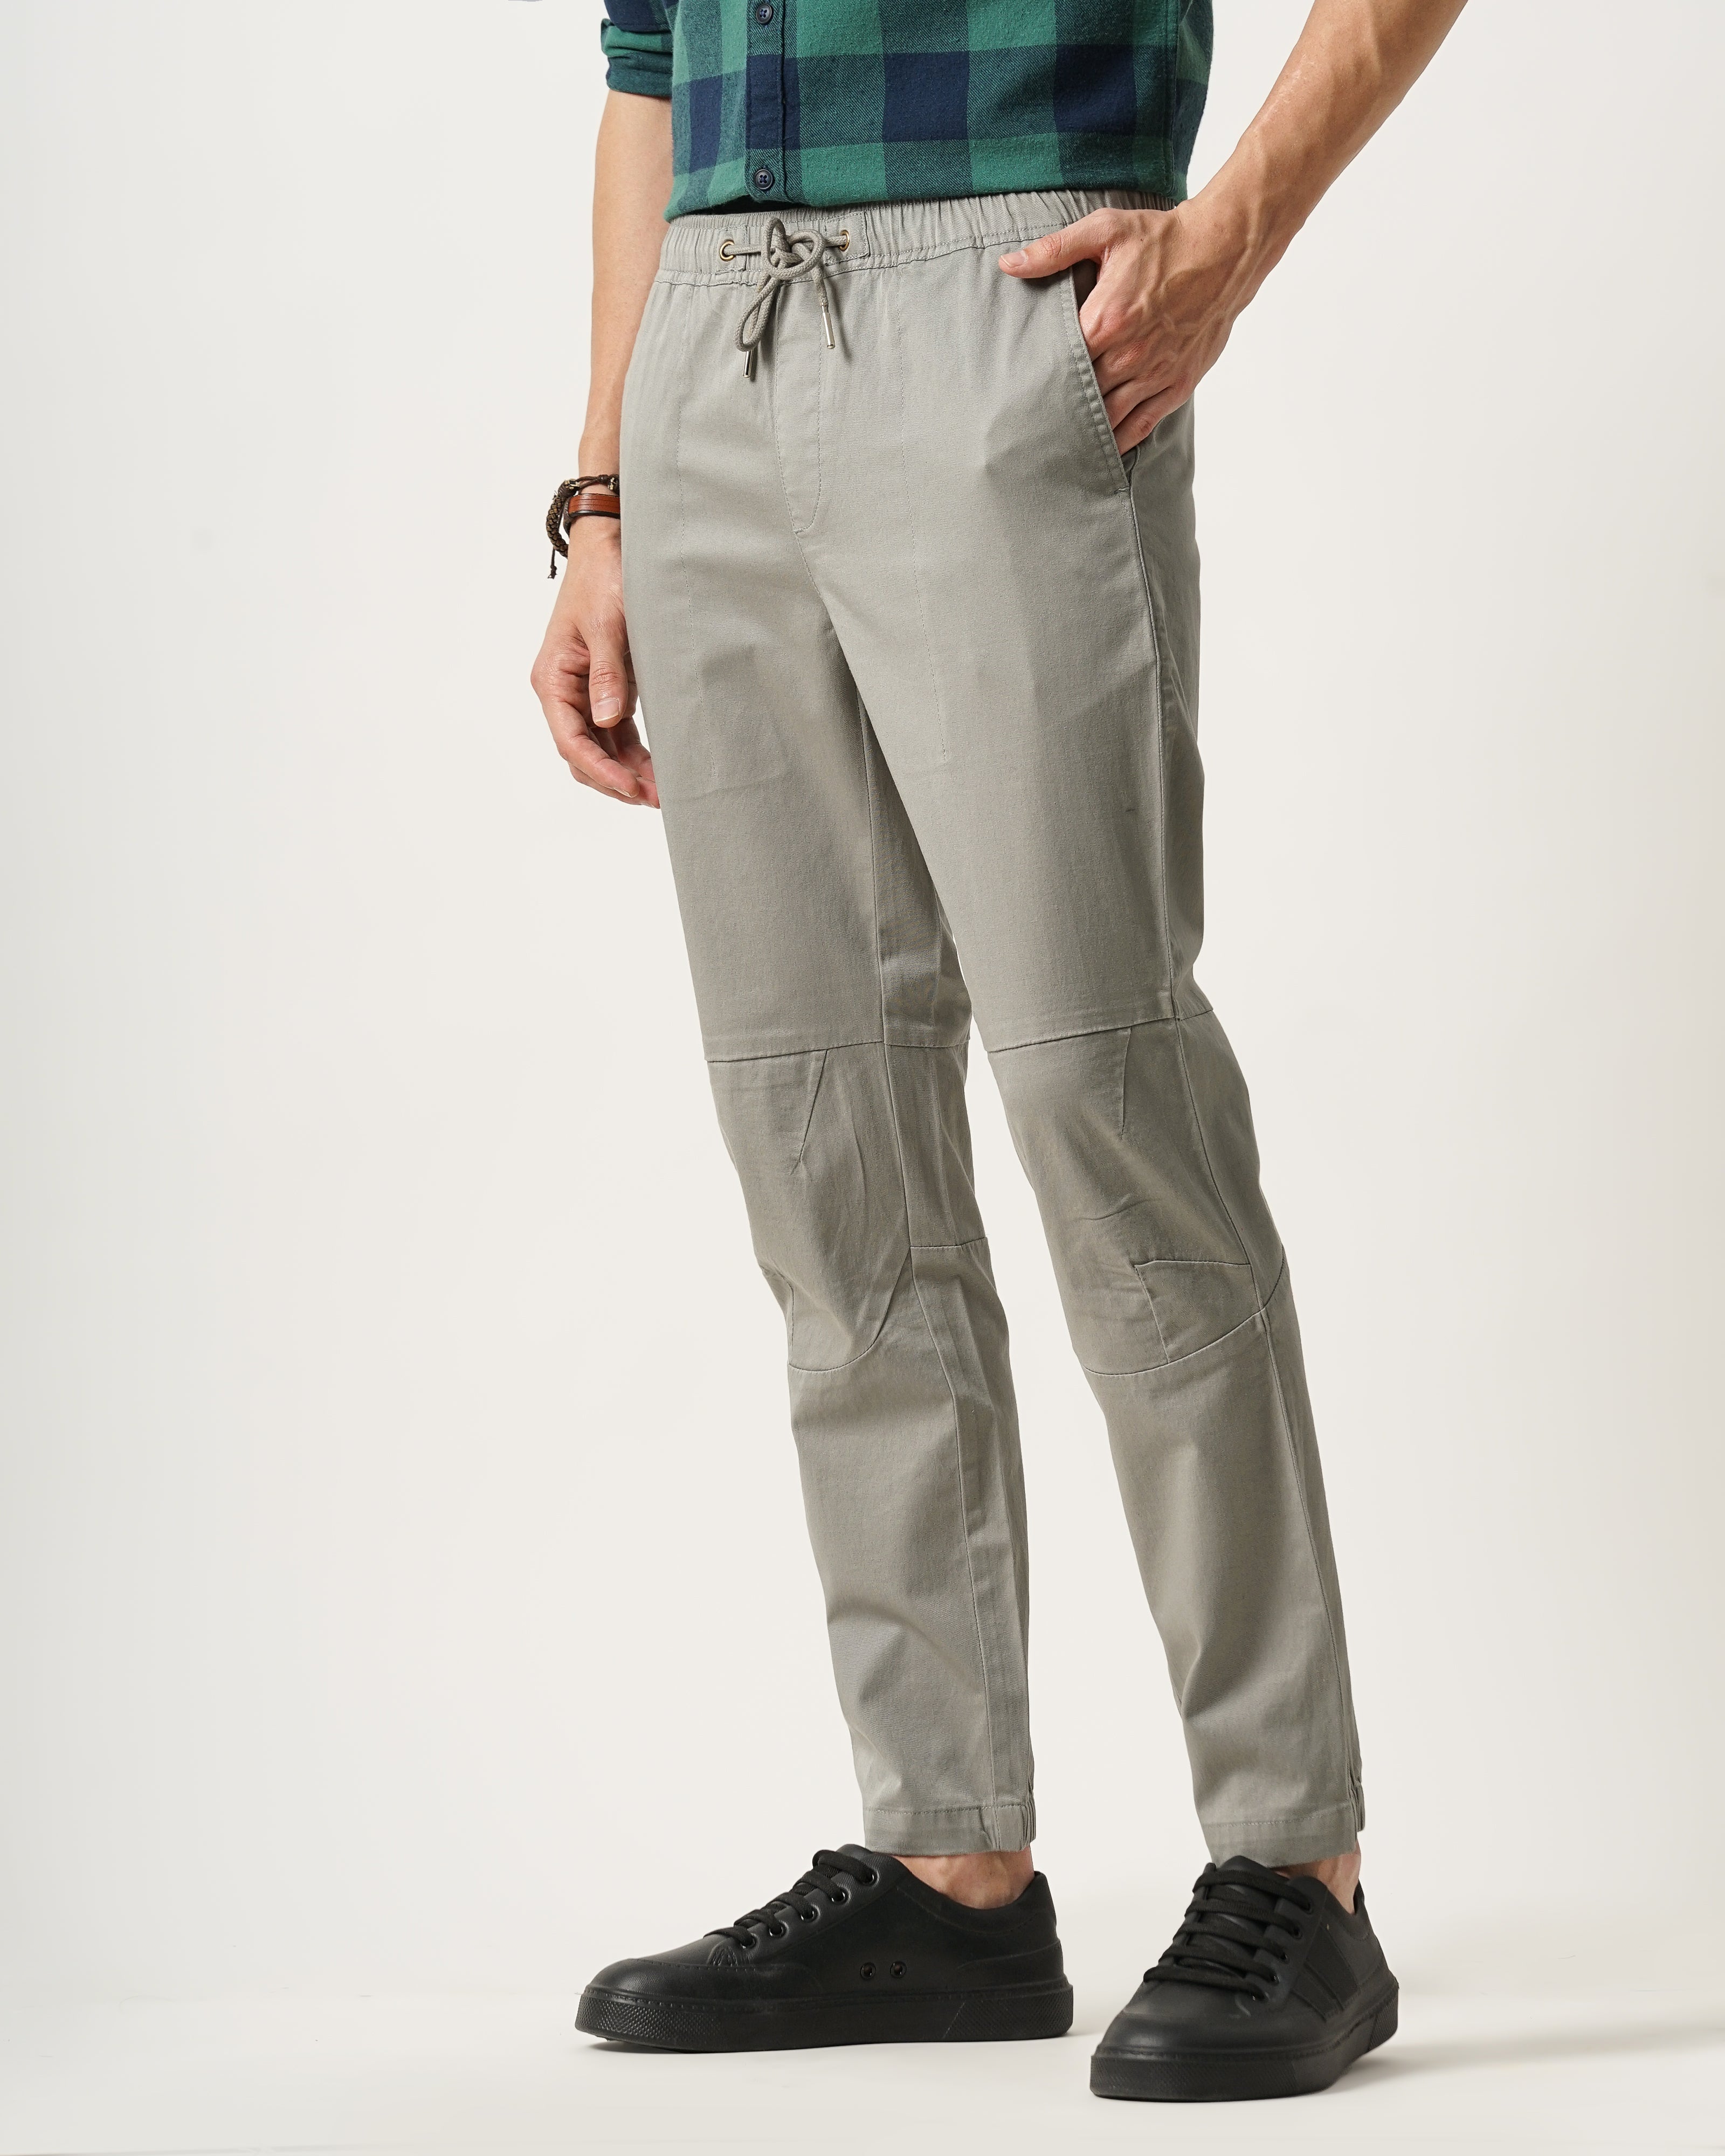 Men's Cargo Ankle Length Trousers